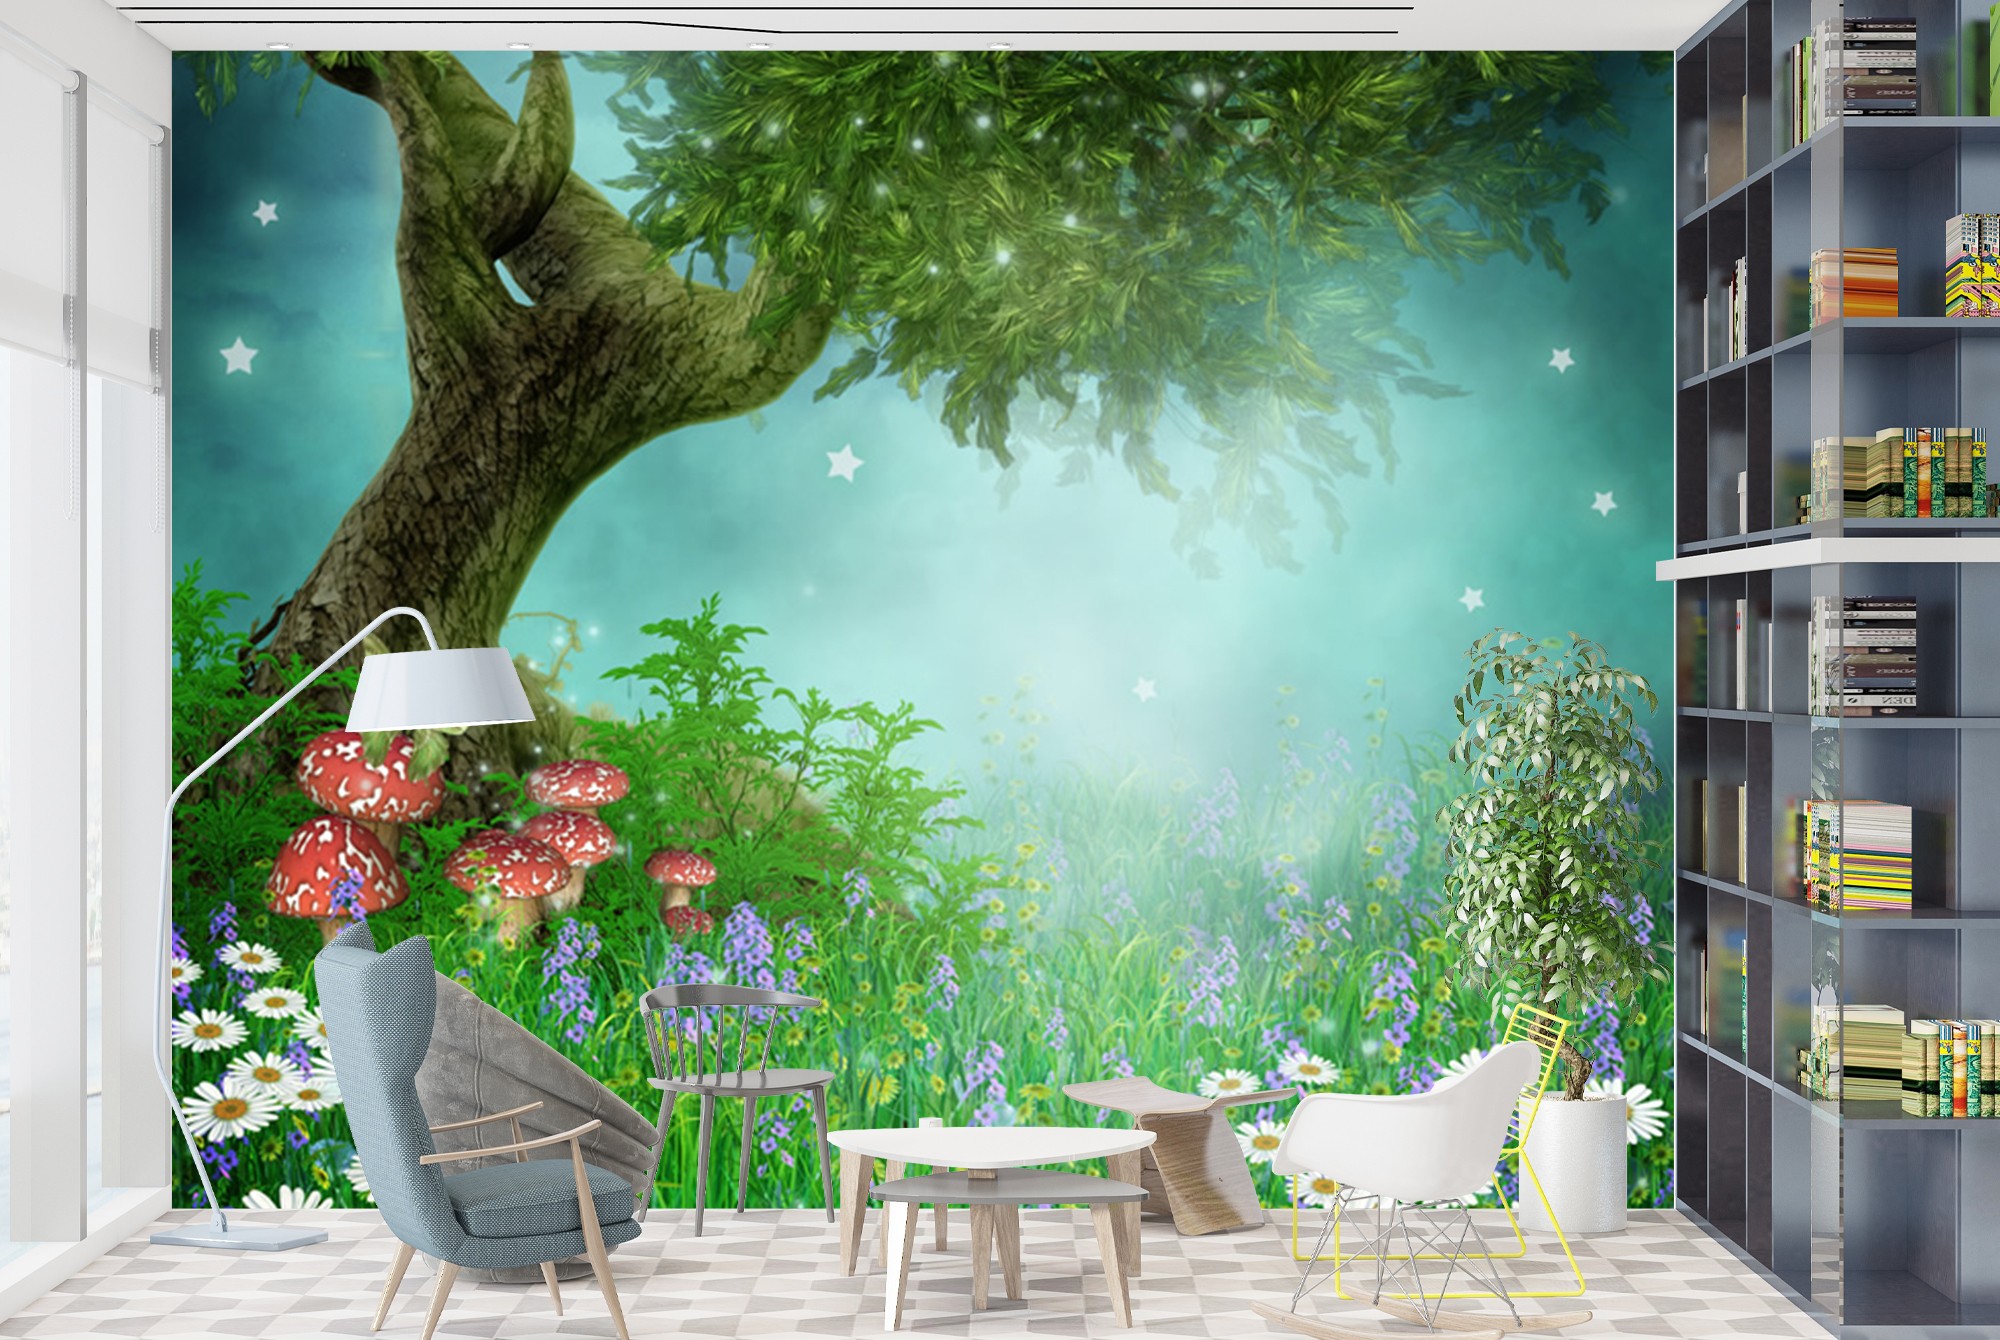 Enchanted Forest Spring Fairytale Wall Mural Wallpaper